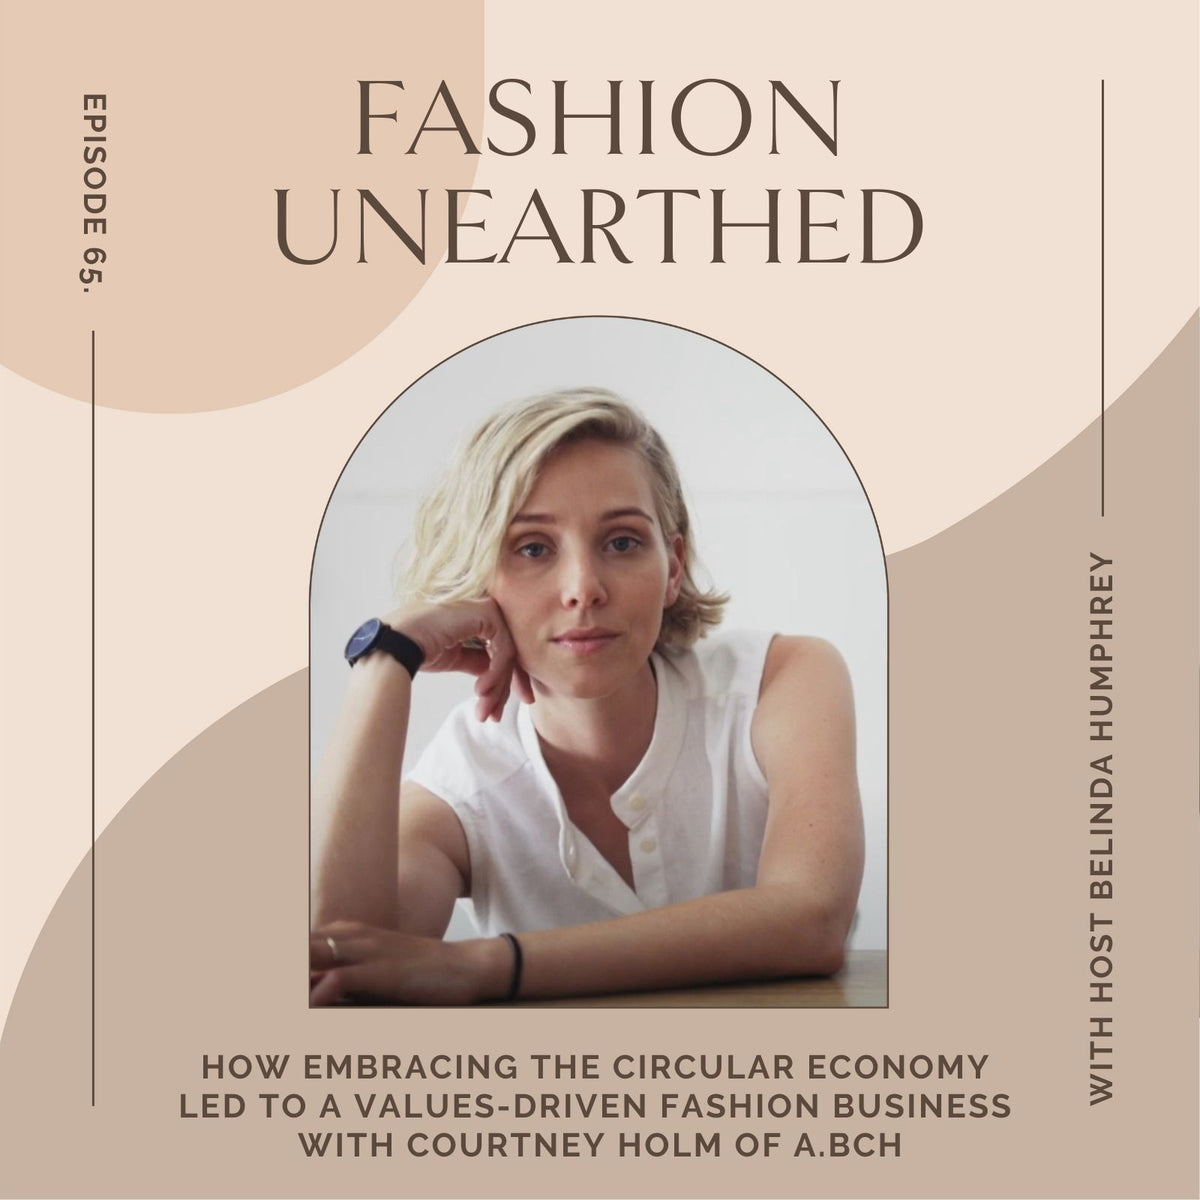 Episode 65: How embracing the circular economy led to a values-driven fashion business with Courtney Holm of A.BCH